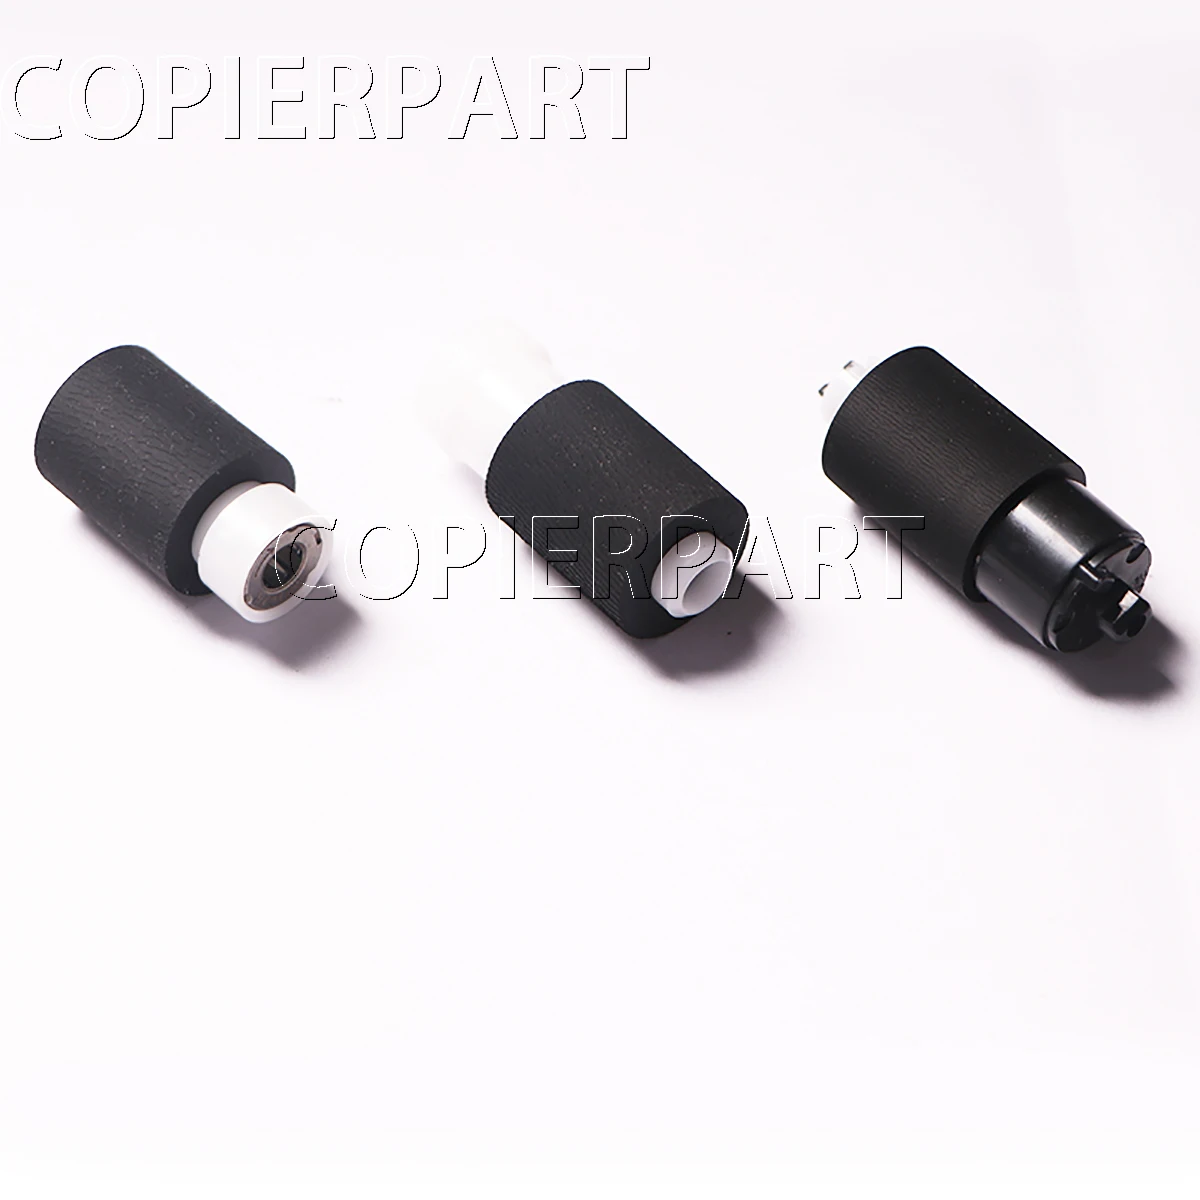 

Pickup Roller Kit for Kyocera P3045dn P3050dn P3055dn P3060dn P3045 P3050 P3055 P3060 3045 3050 3055 3060